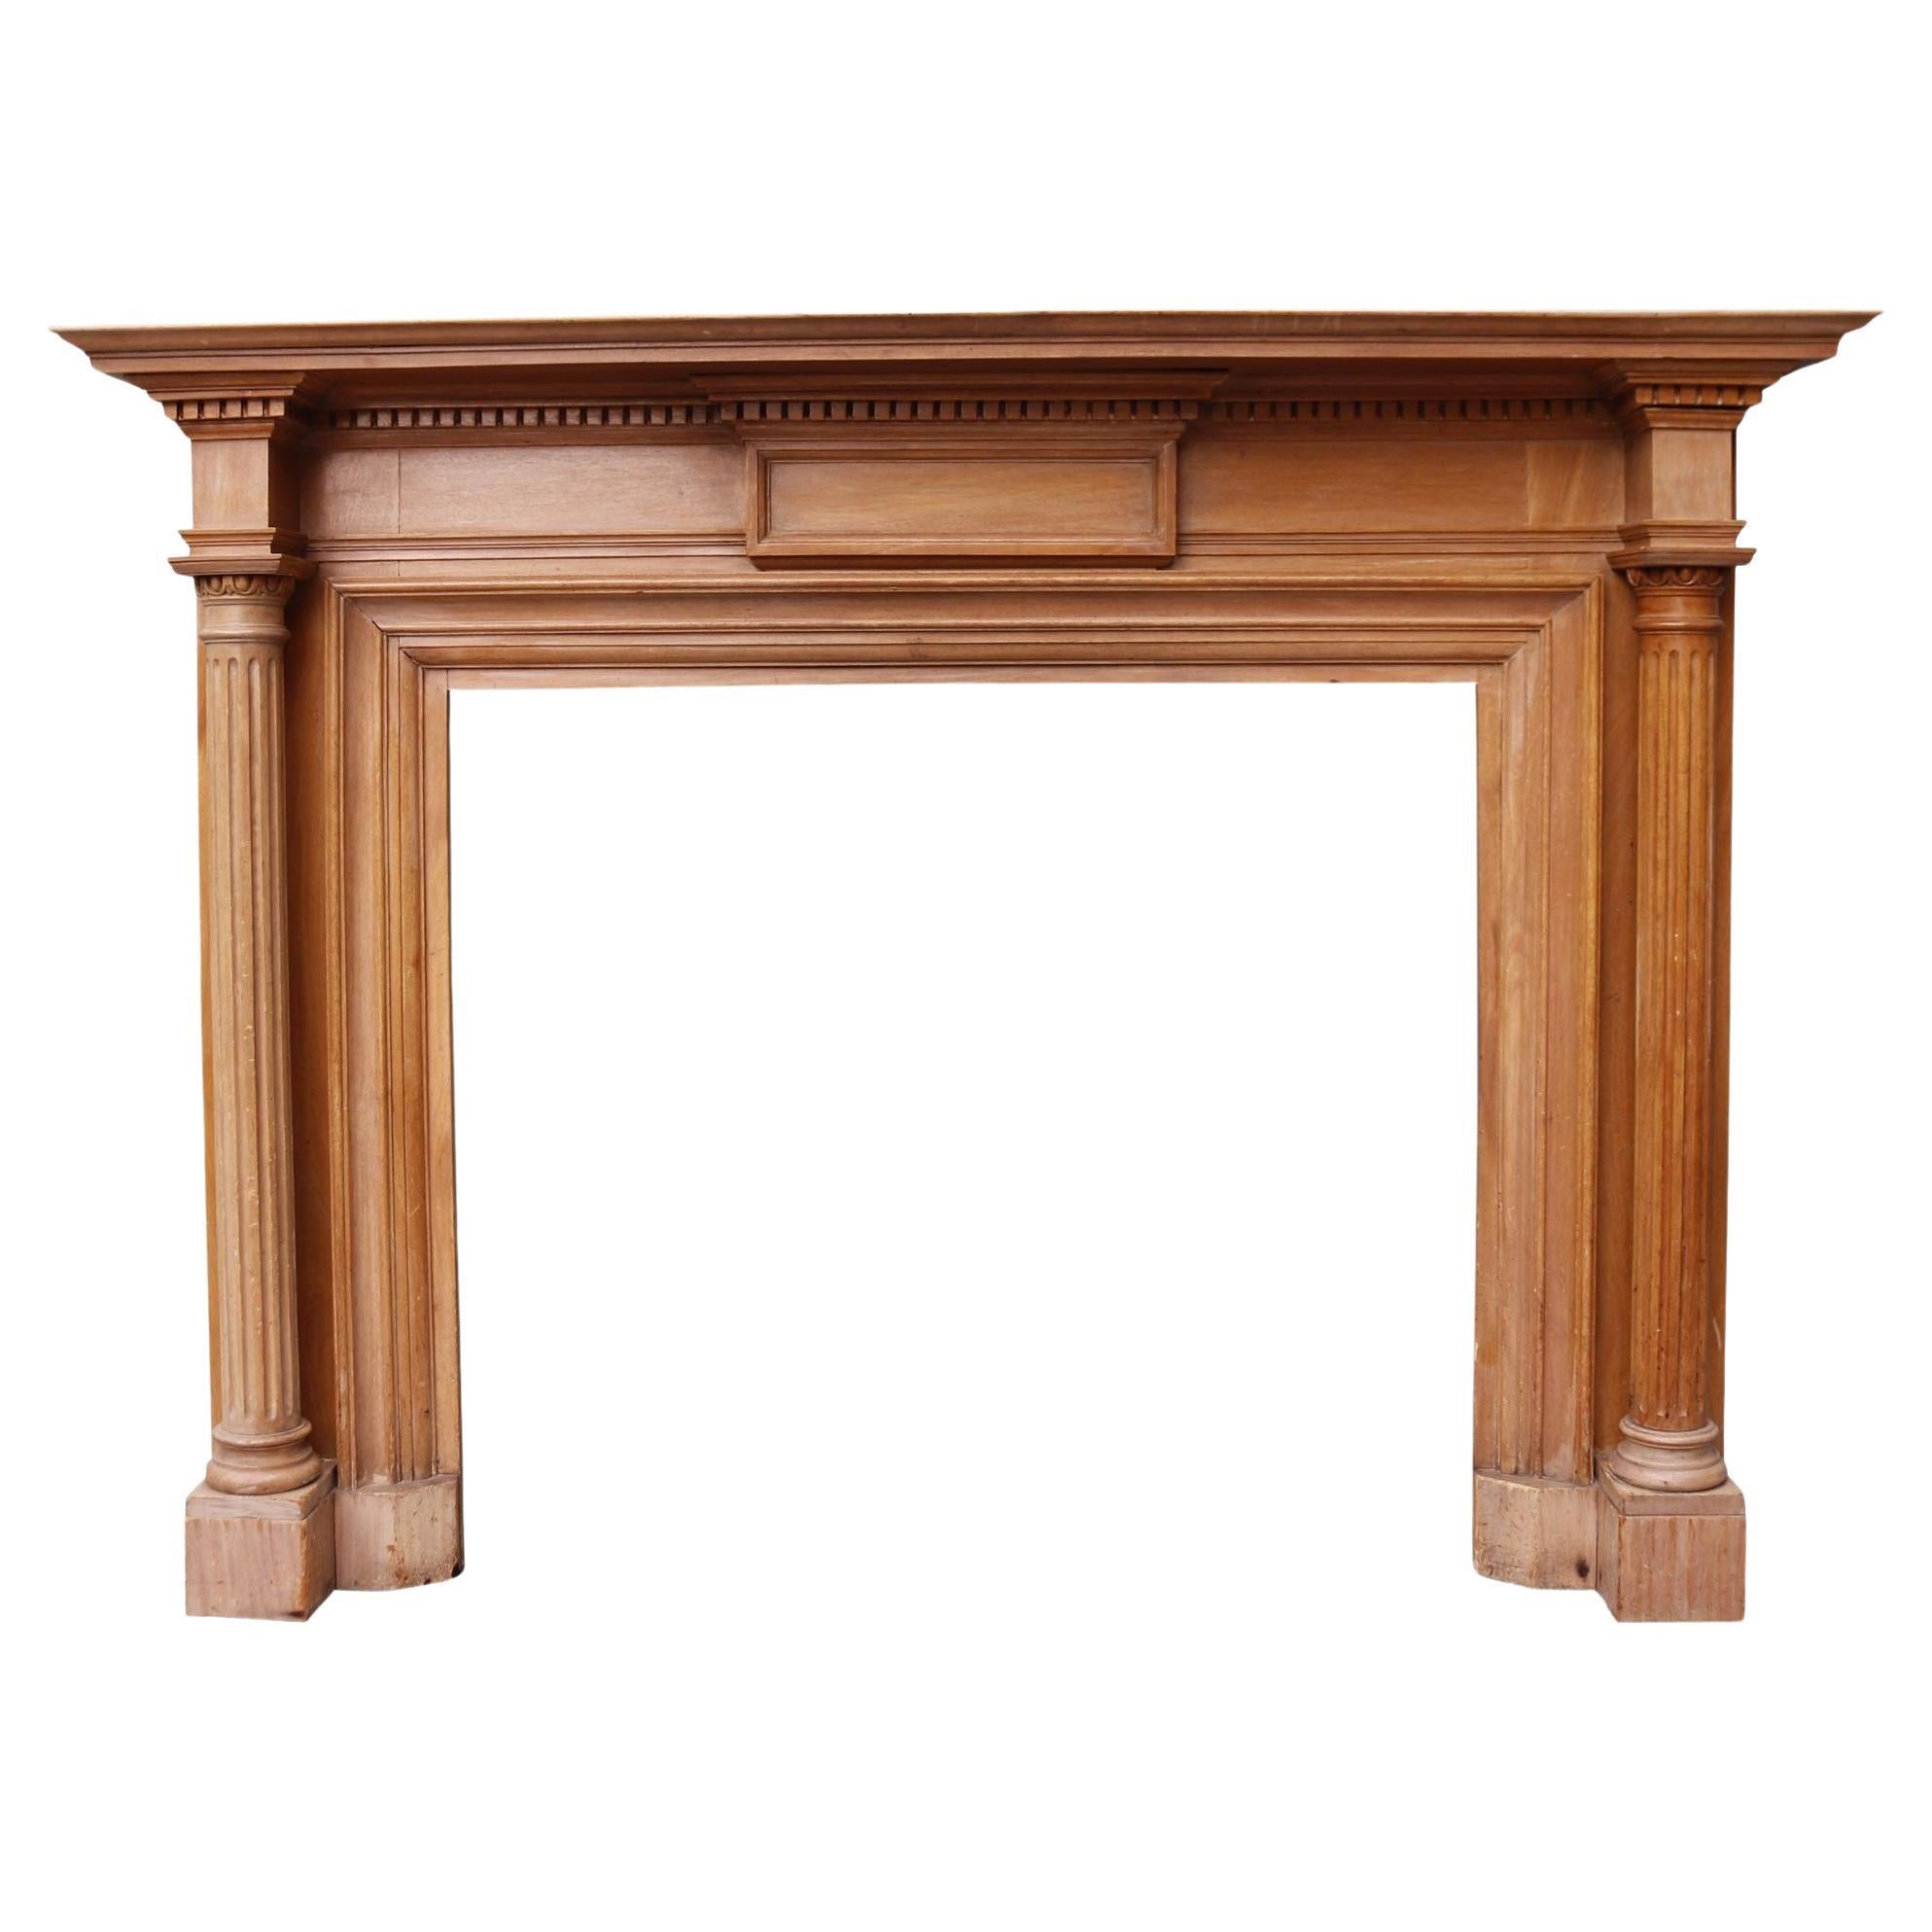 Neoclassical Columned Timber Chimney Piece For Sale